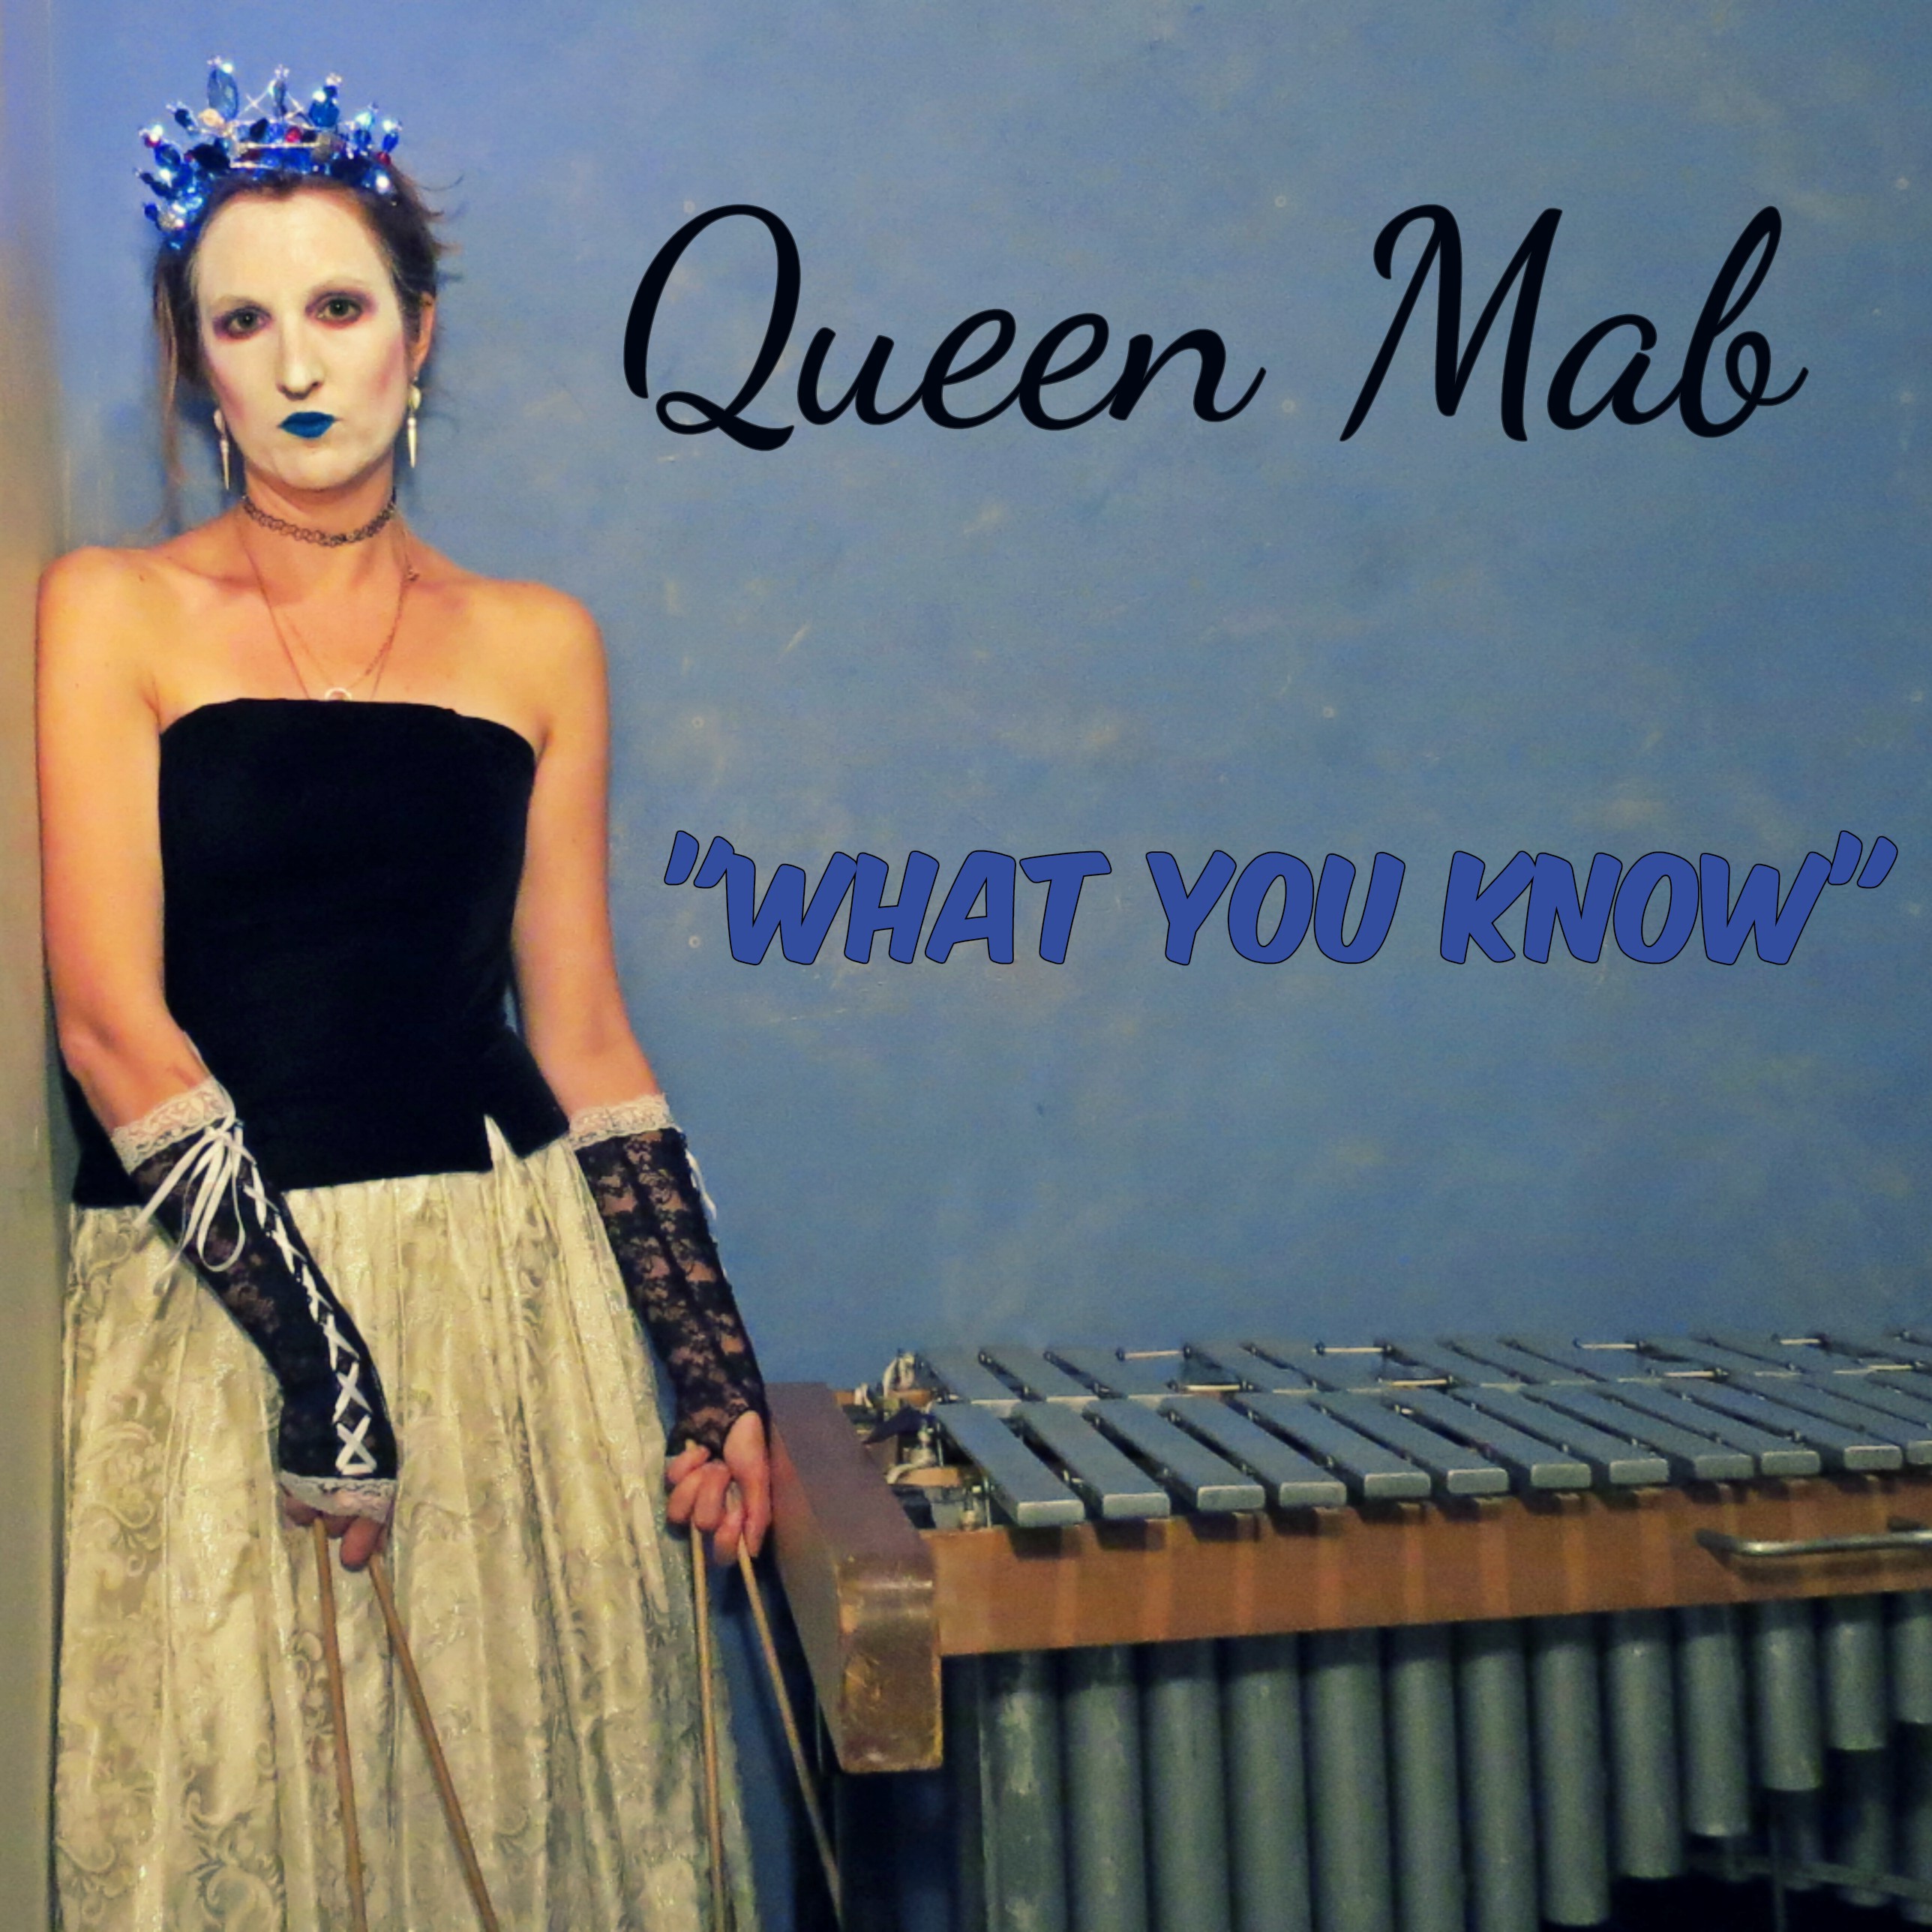 Catherine stands next to her vibraphone holding four mallets. She has on a blue glowing crown. Her face is painted white, and her lips are painted blue. She has on a black strapless dress with a long white skirt. Text on the image reads "Queen Mab - What You Know." 